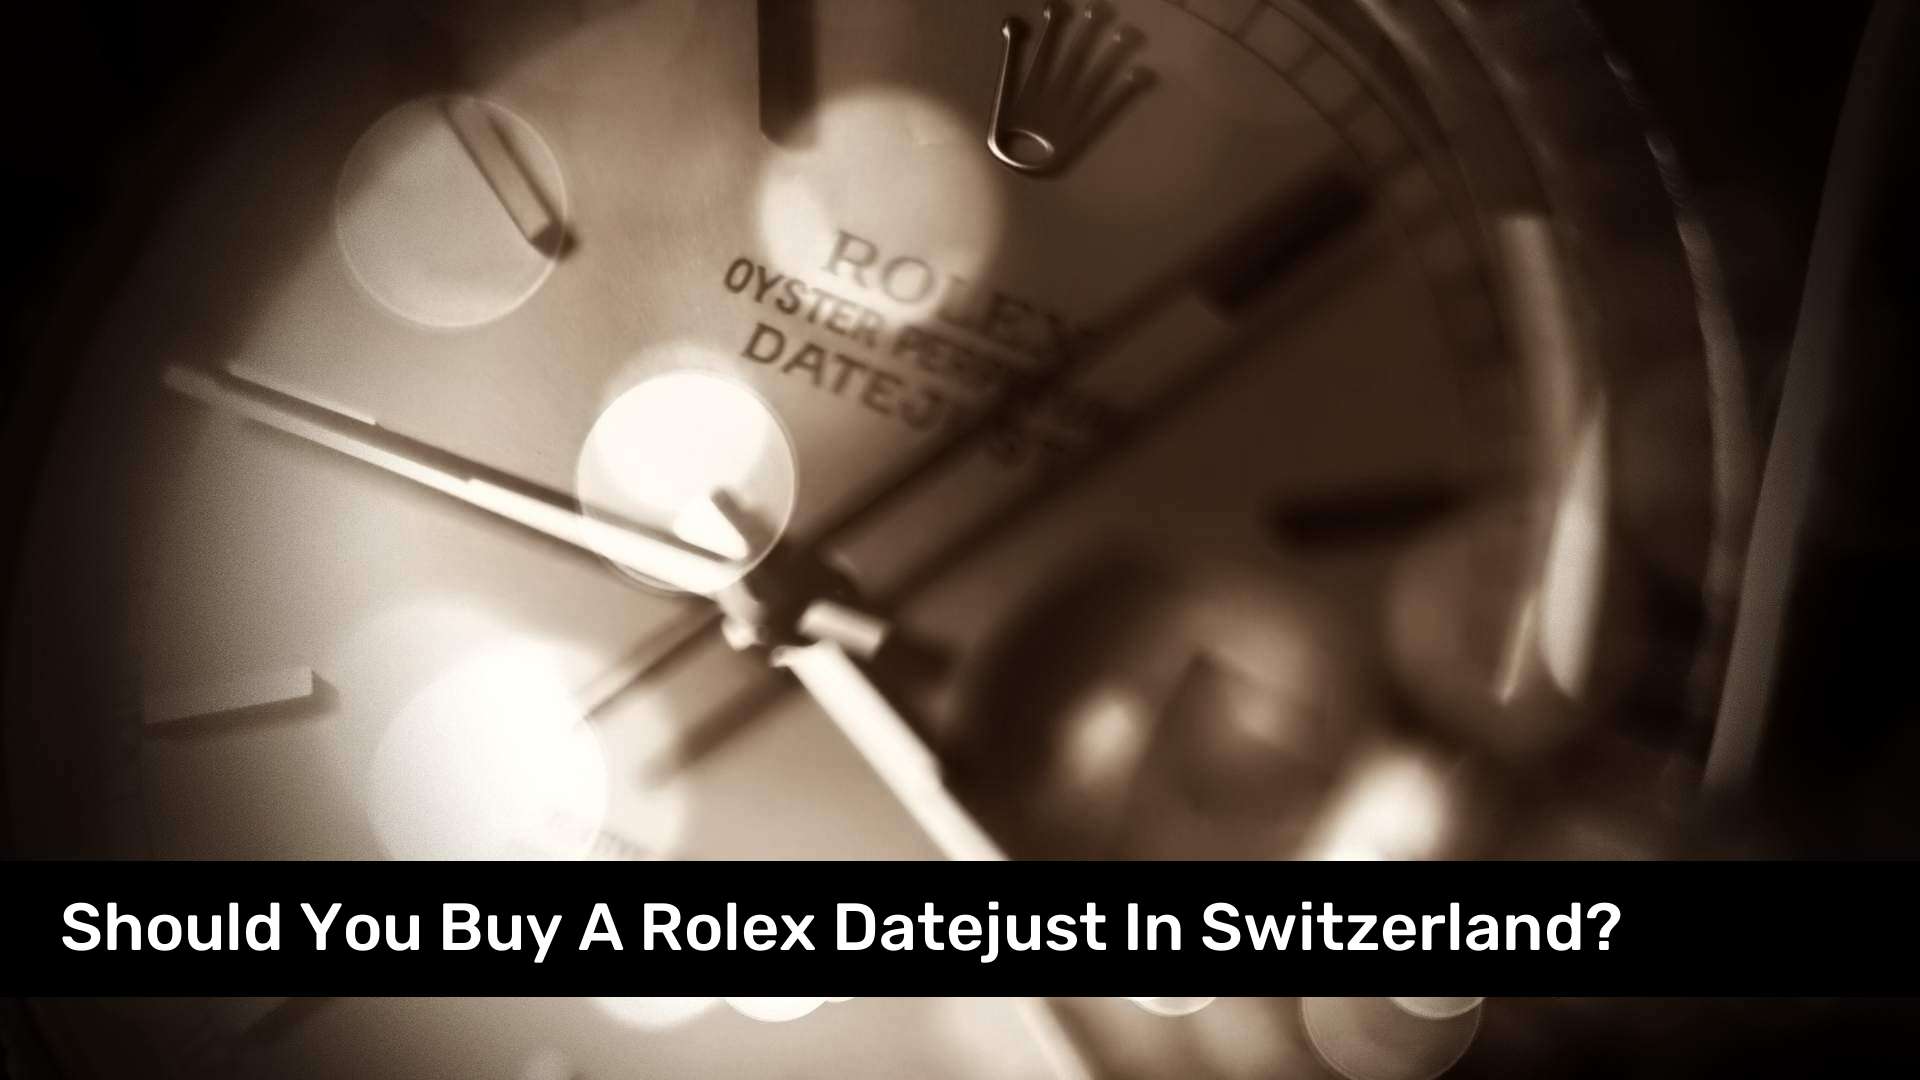 Should You Buy A Rolex Datejust In Switzerland?